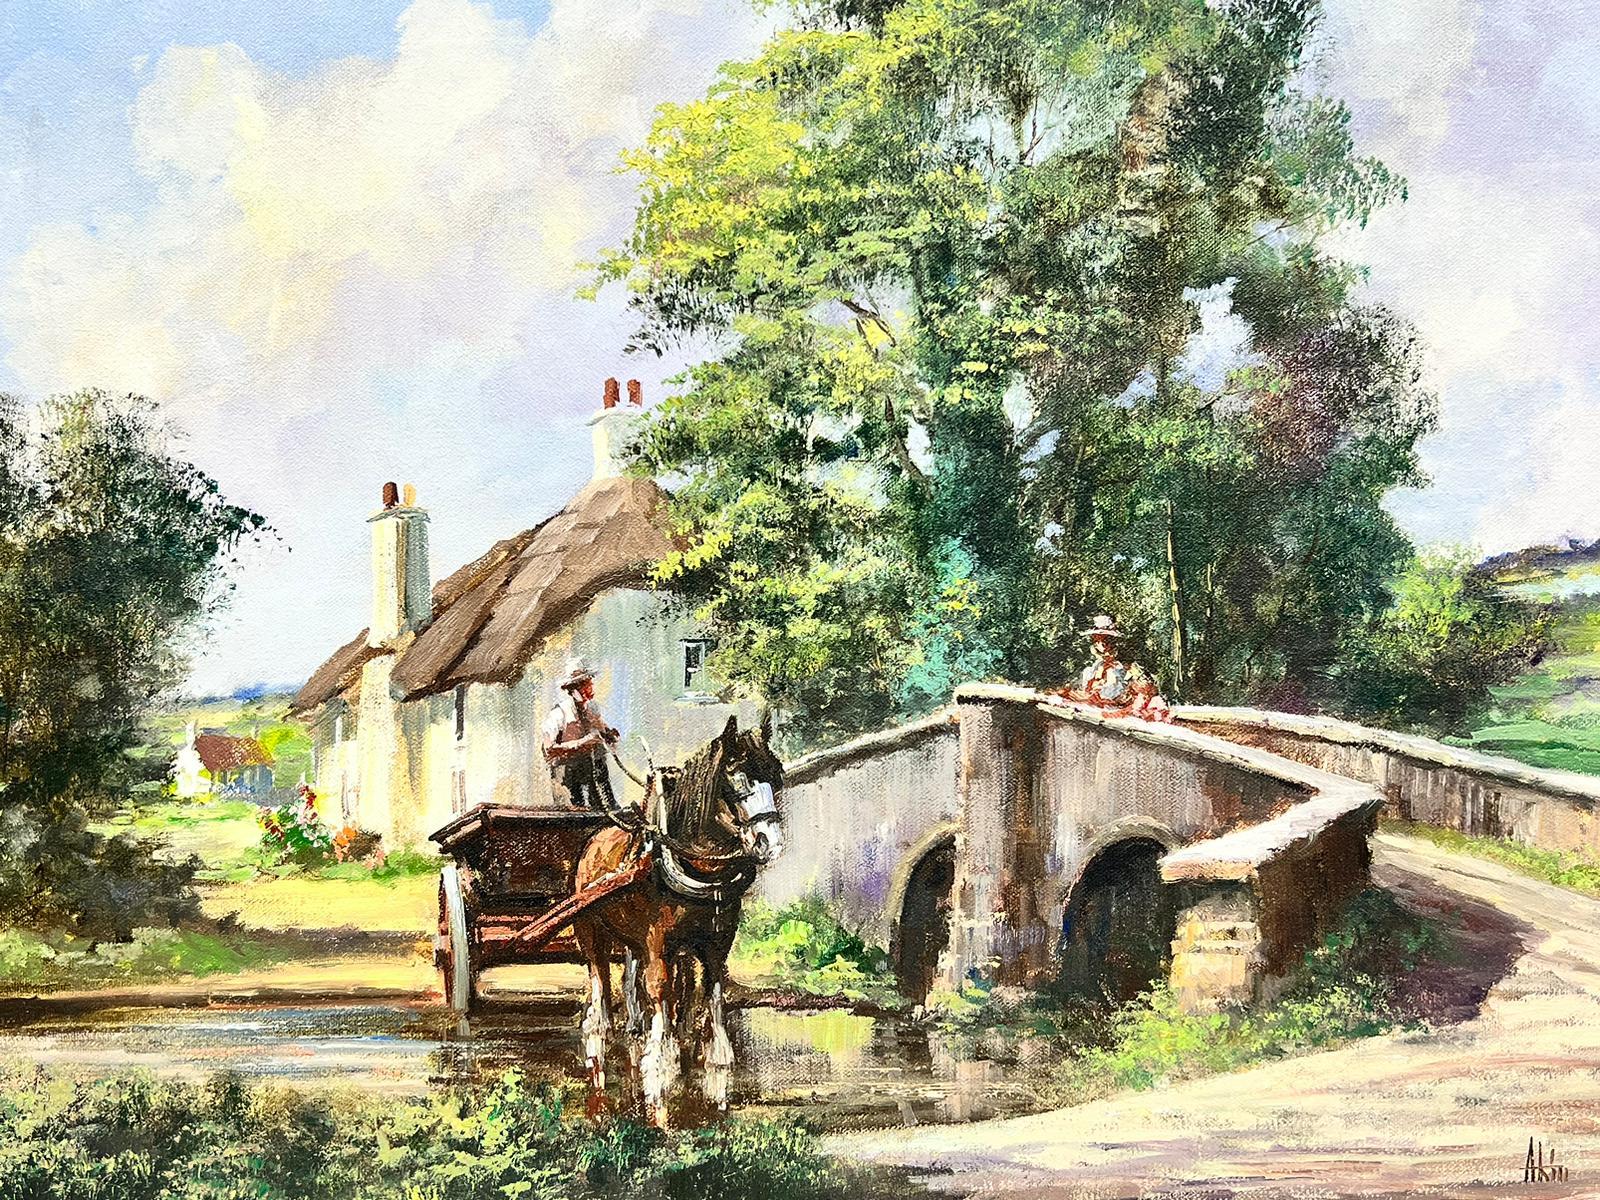 Alan King (British 20th century)
signed oil on canvas, framed
framed: 19 x 23 inches
canvas: 16 x 20 inches
provenance: private collection, England 
condition: overall very good and ready to enjoy